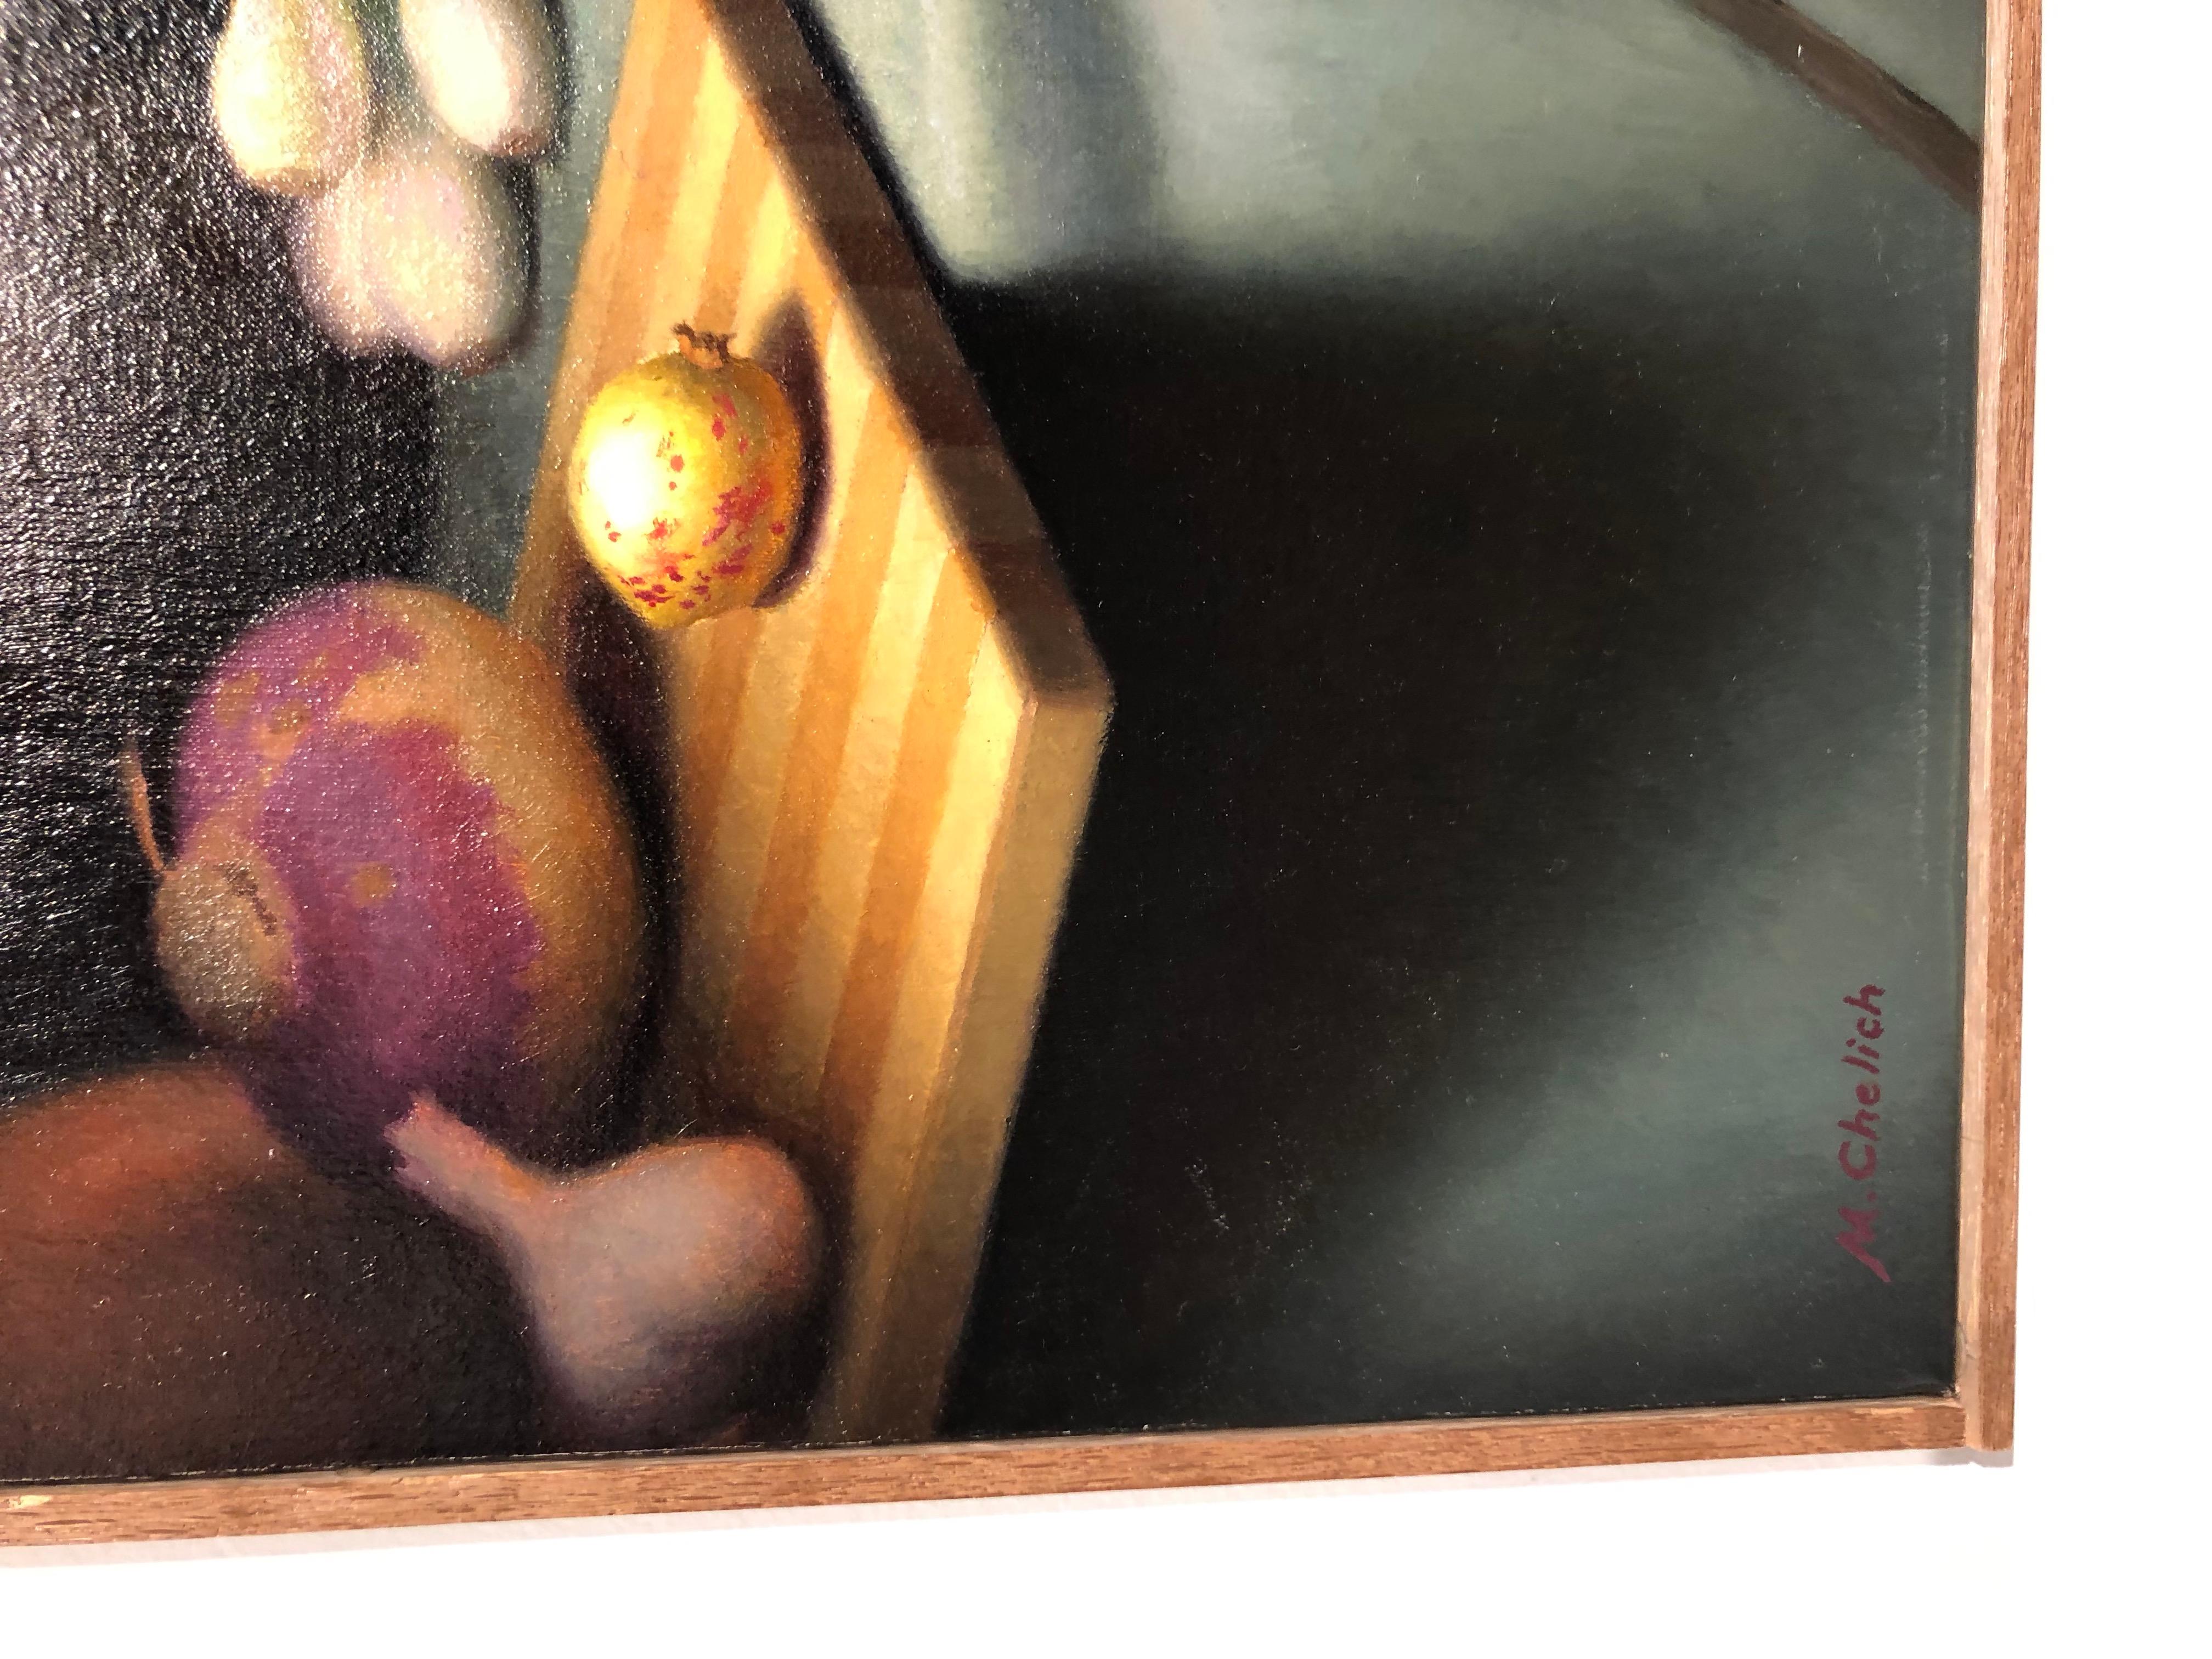 Still Life with Turnips, Original Oil Painting on Canvas by Michael Chelich (Handbemalt)